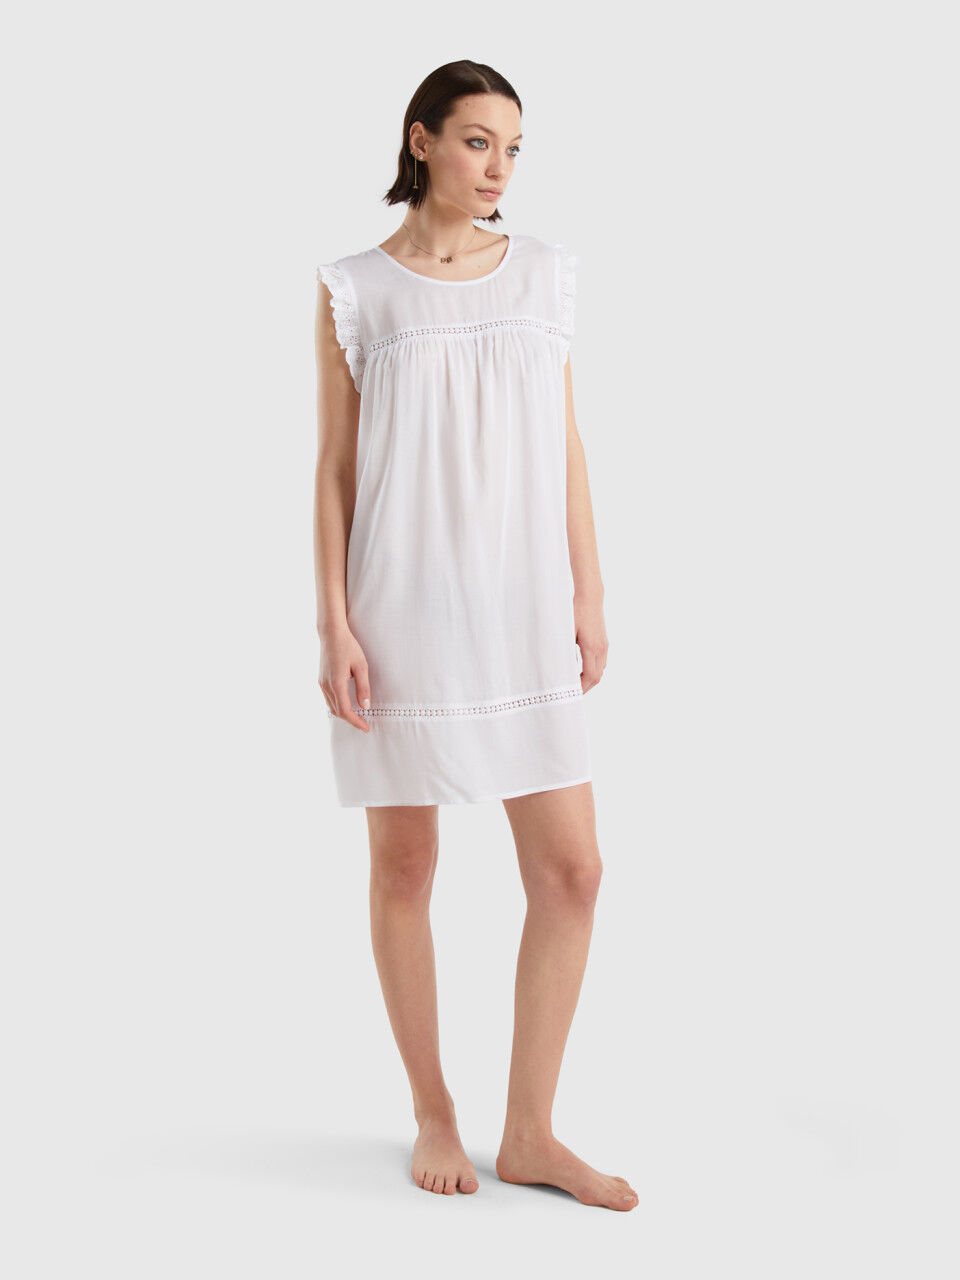 Nightshirt with embroidery